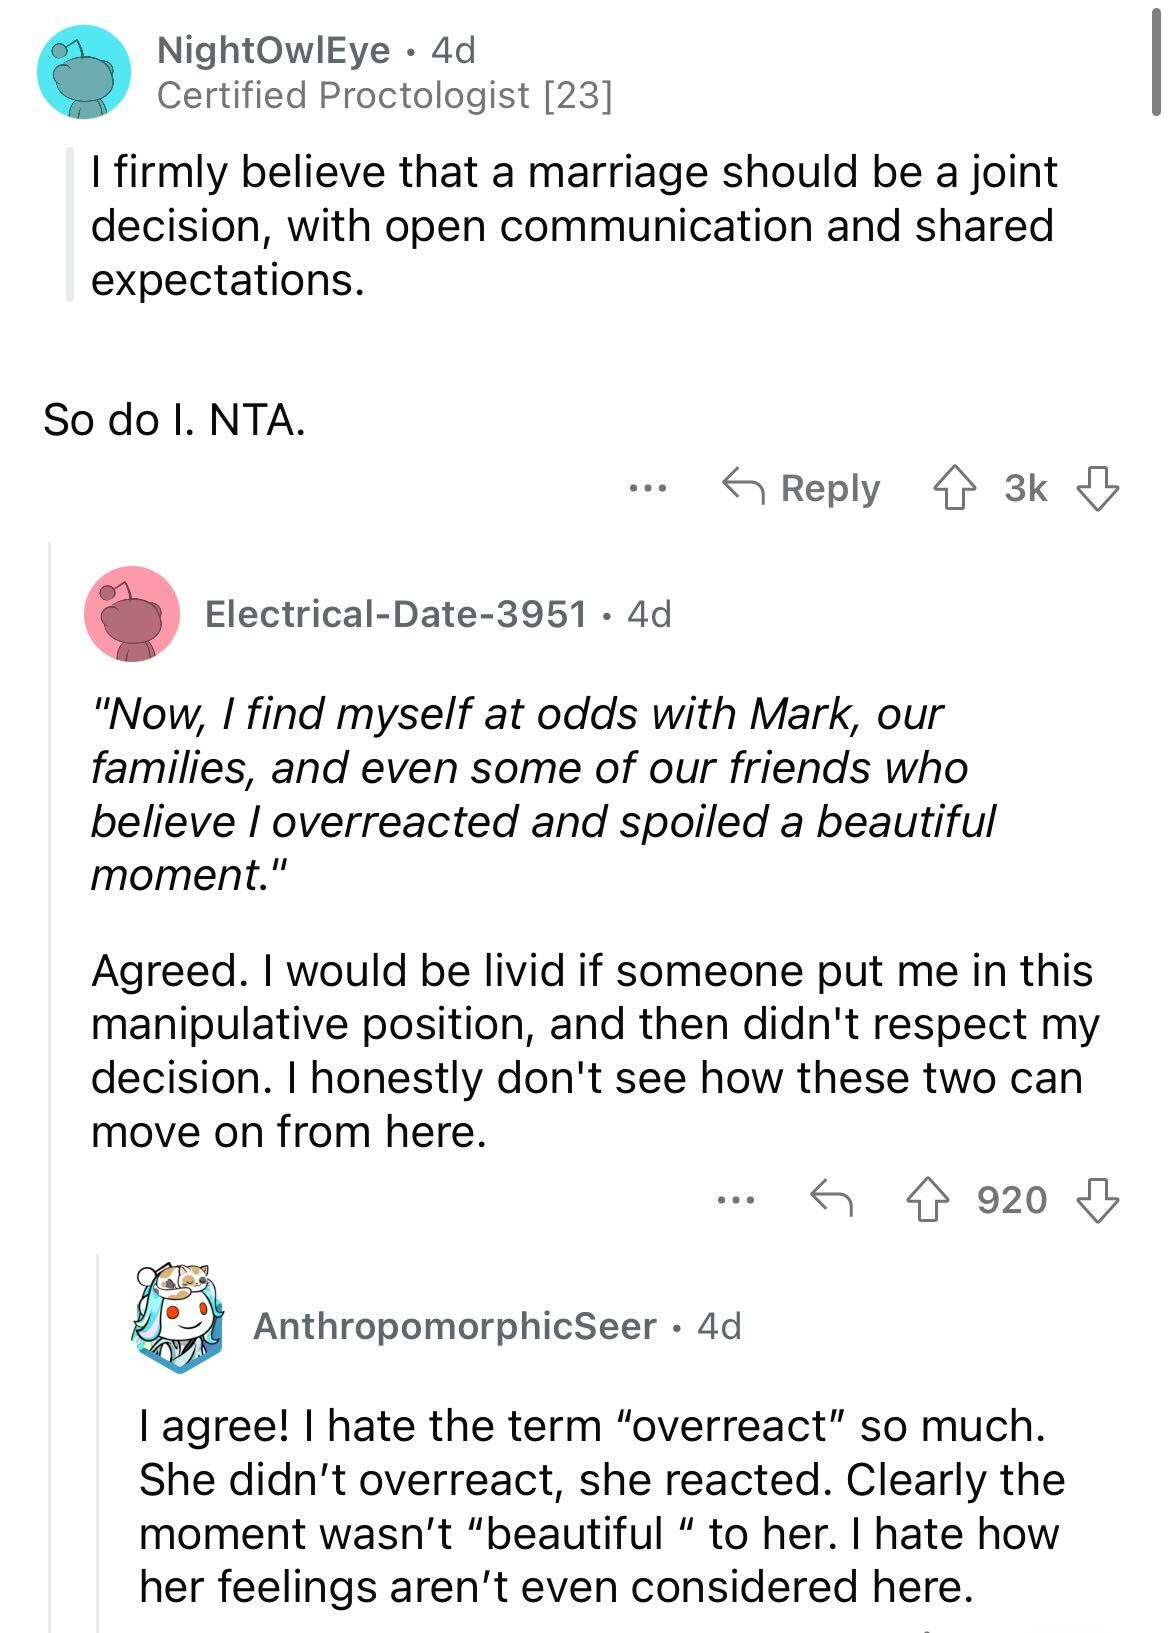 am i the asshole thread on reddit - document - NightOwlEye 4d Certified Proctologist 23 I firmly believe that a marriage should be a joint decision, with open communication and d expectations. So do I. Nta. ... ElectricalDate3951 4d "Now, I find myself at